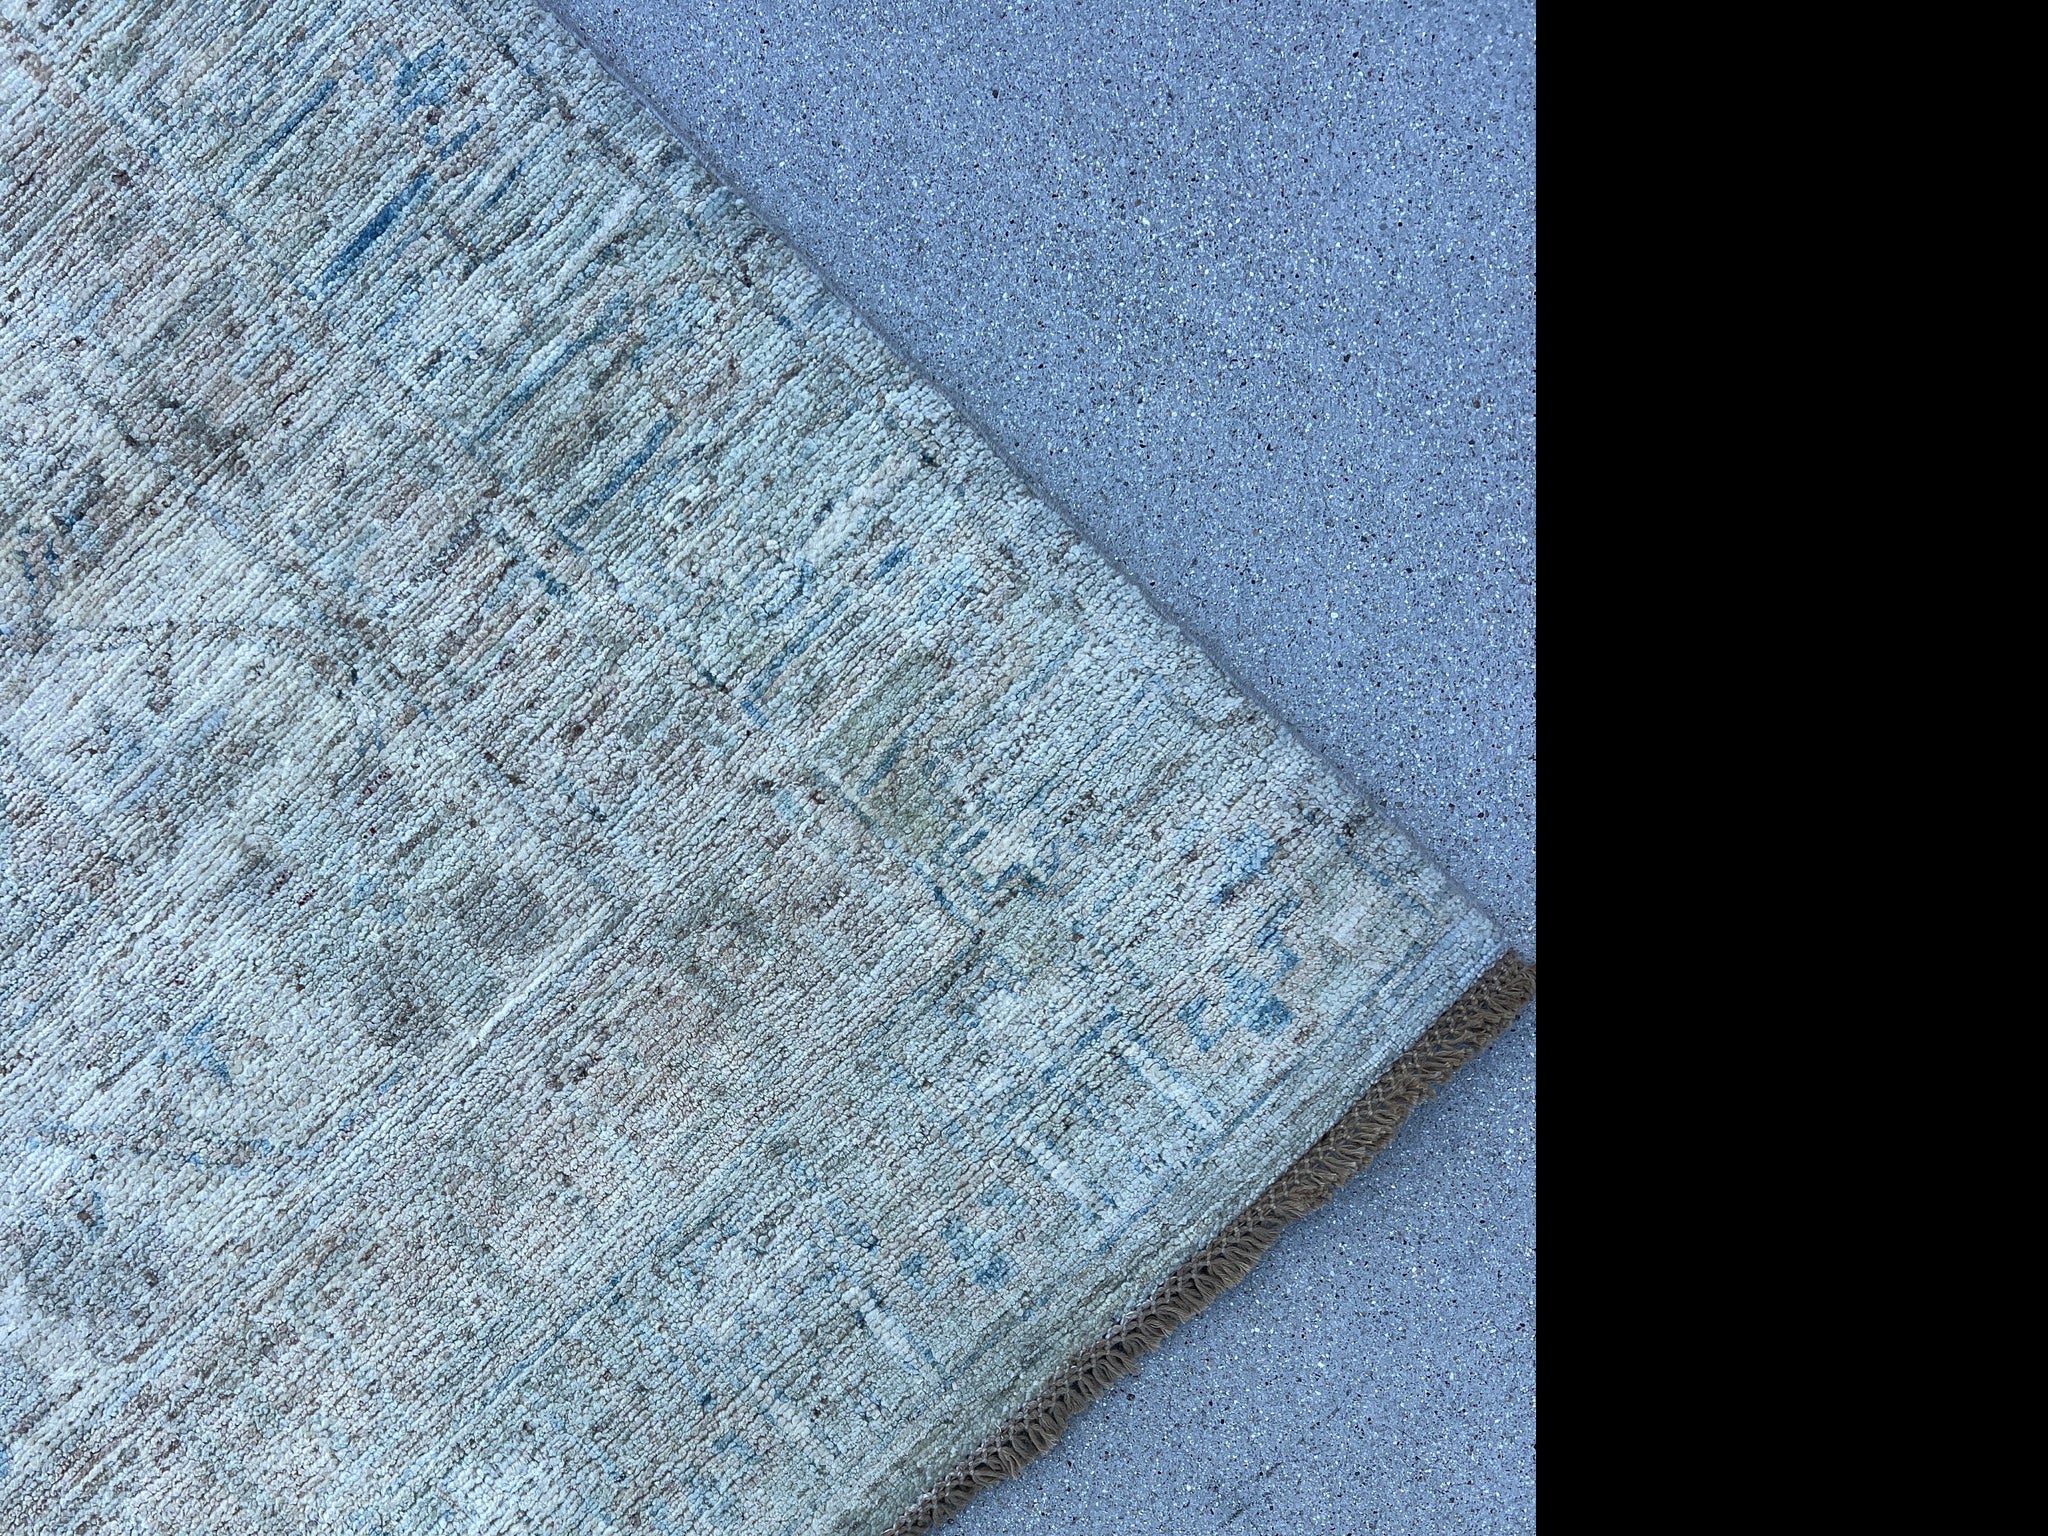 9x12 (270x365) Handmade Afghan Rug | Muted Neutral Grey Sky Baby Blue Teal Tan Cream Beige | Turkish Floral Persian Hand Knotted Wool